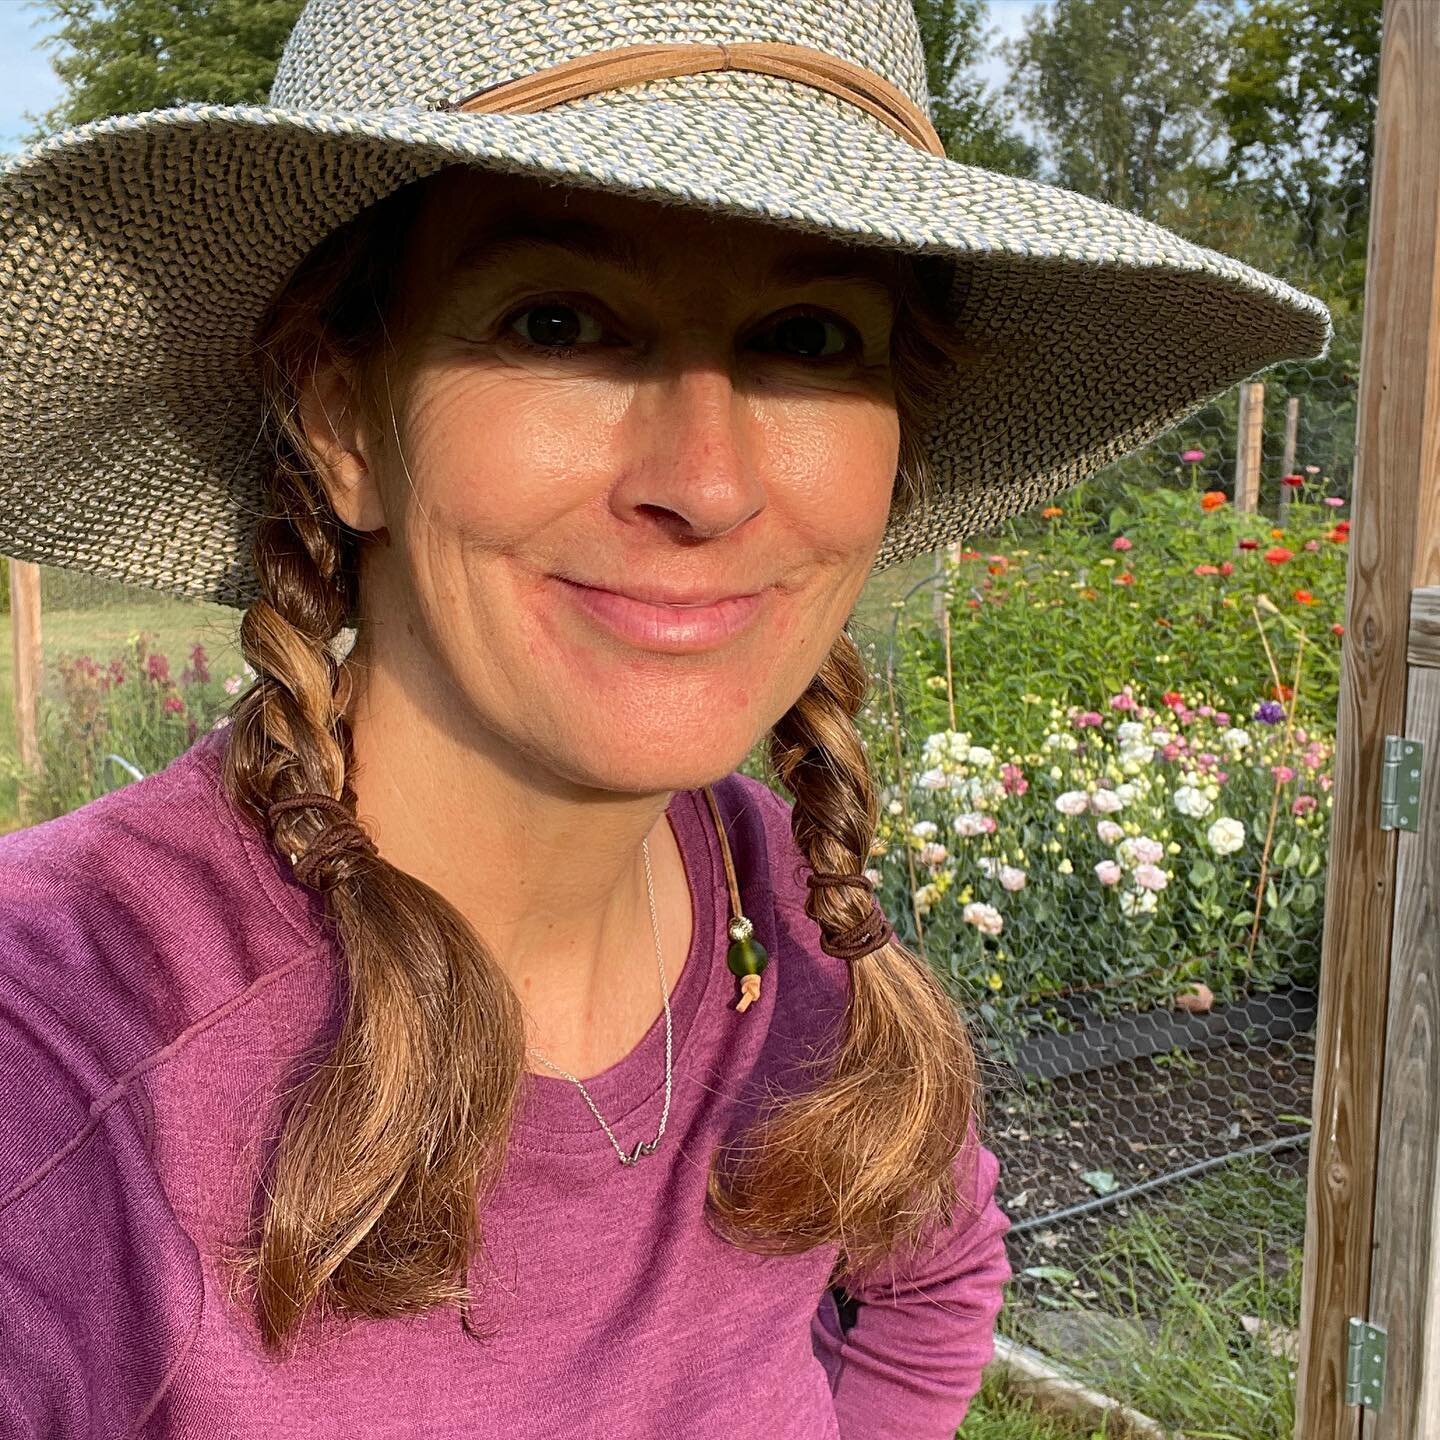 Hi. It&rsquo;s me. It has been awhile. I have savored the last few months of family time and planning for my 20th growing season - fifth year as a business growing and selling my flowers. 

Growing suits me. I love the science, the challenges, the ha